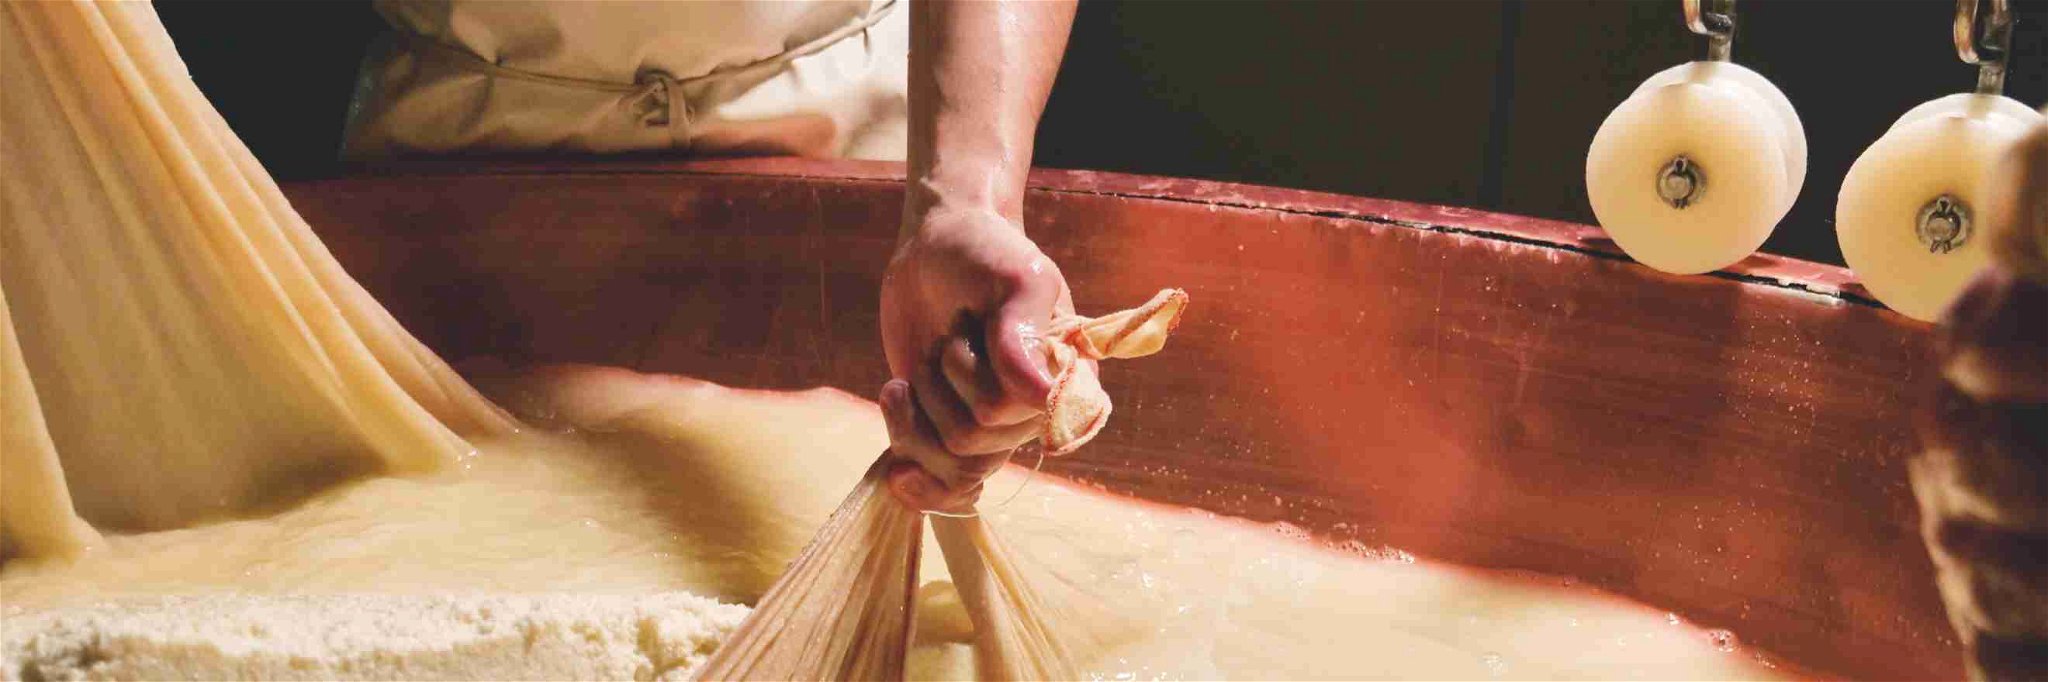 Cheesemaking: separating curds from whey